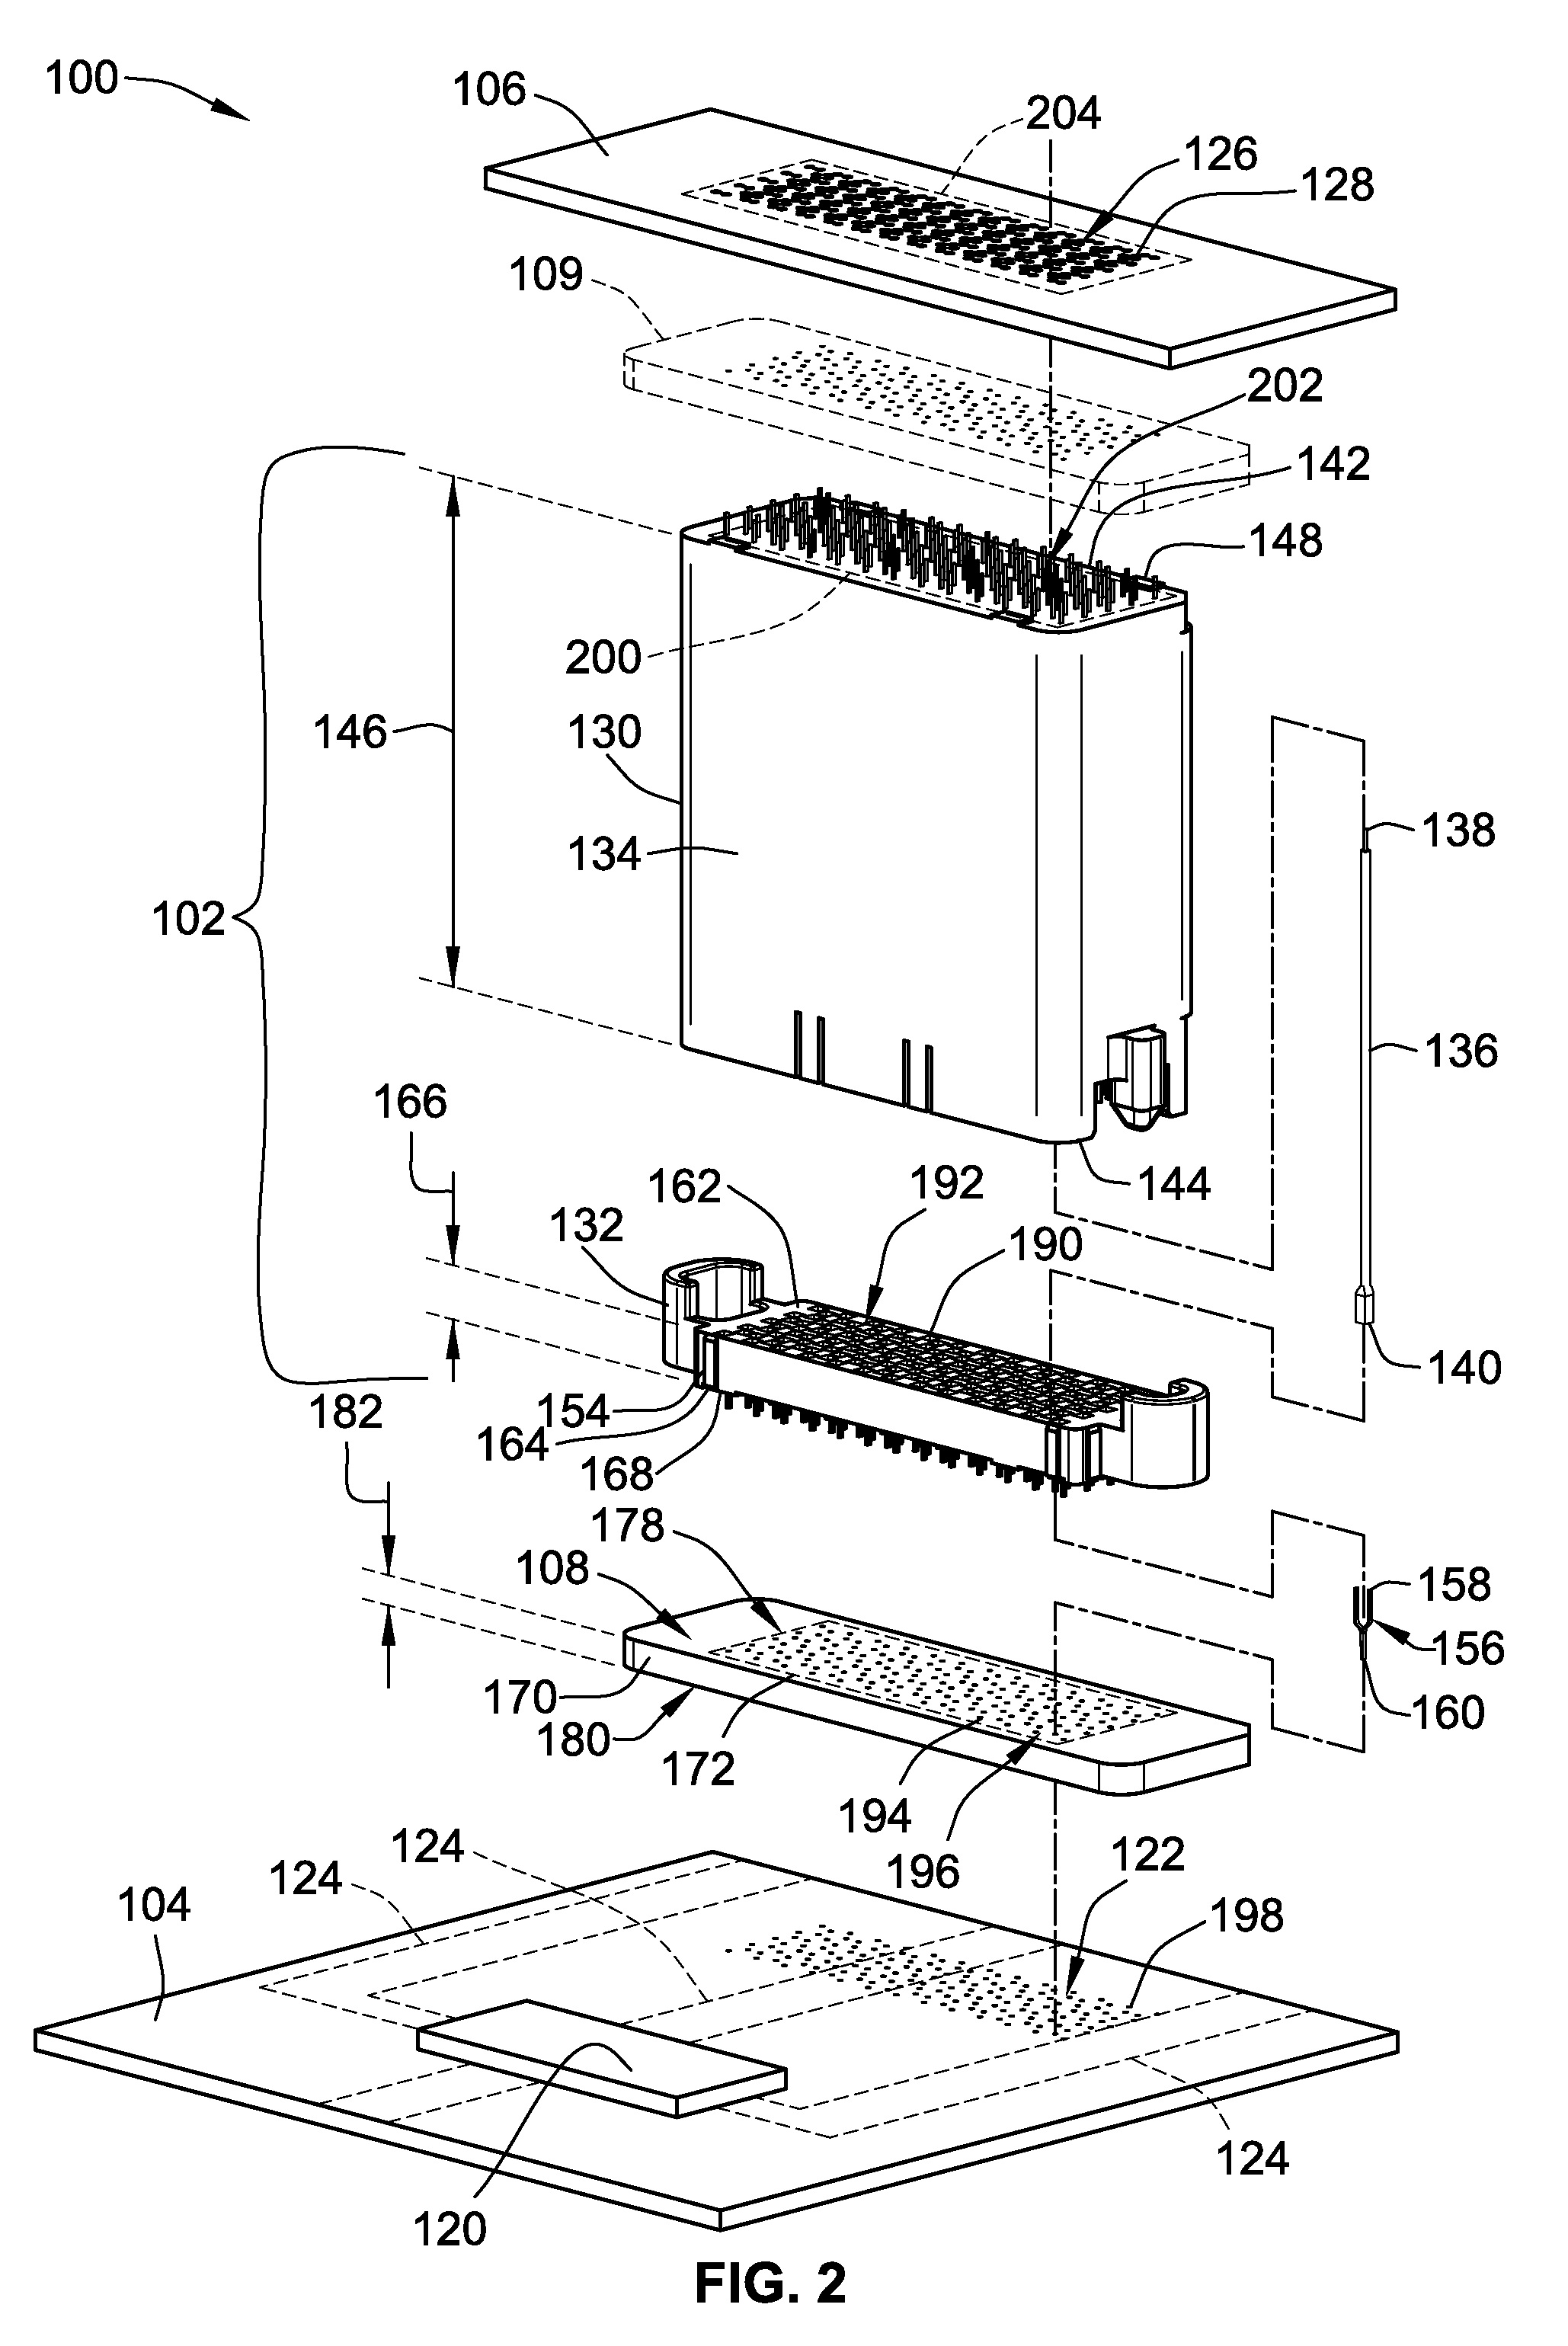 Connector assembly having a mating adapter